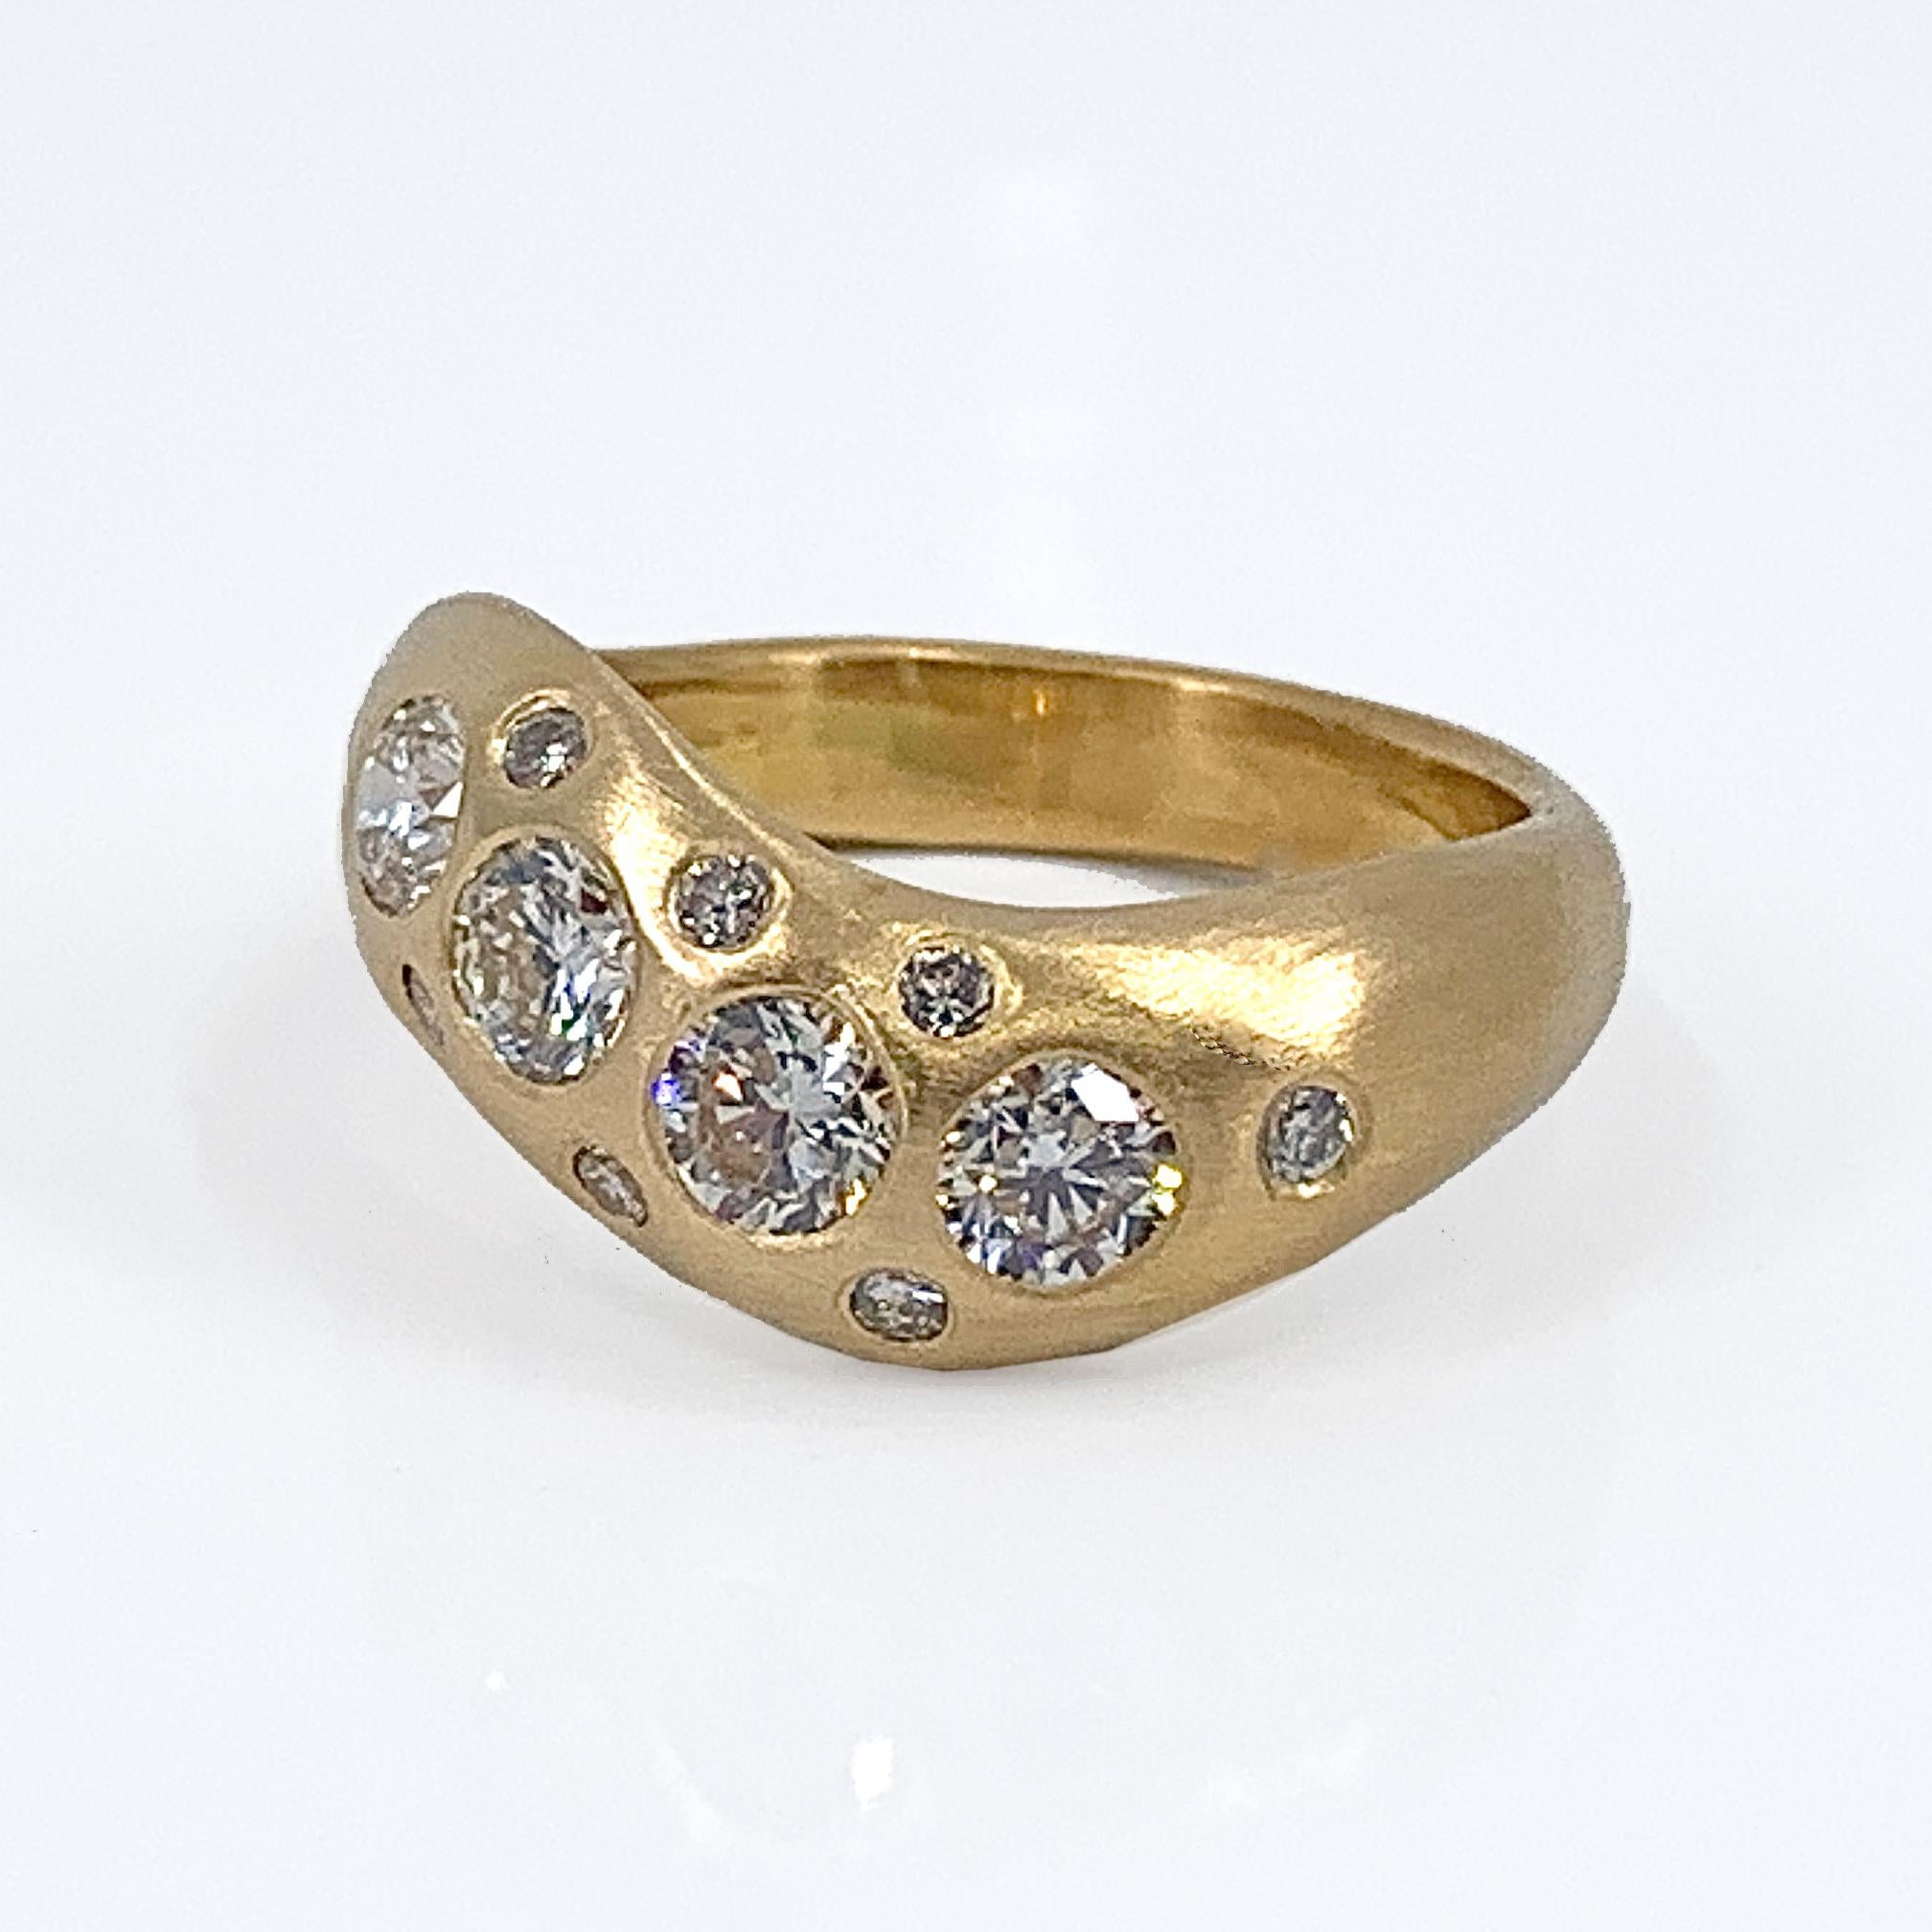 An original design by Eytan Brandes presents the perfect union of yellow gold and diamonds.  Instead of the gold serving primarily as a delivery system for the stones, this ring gives both components a starring role.  

Eytan's favorite metal is 18